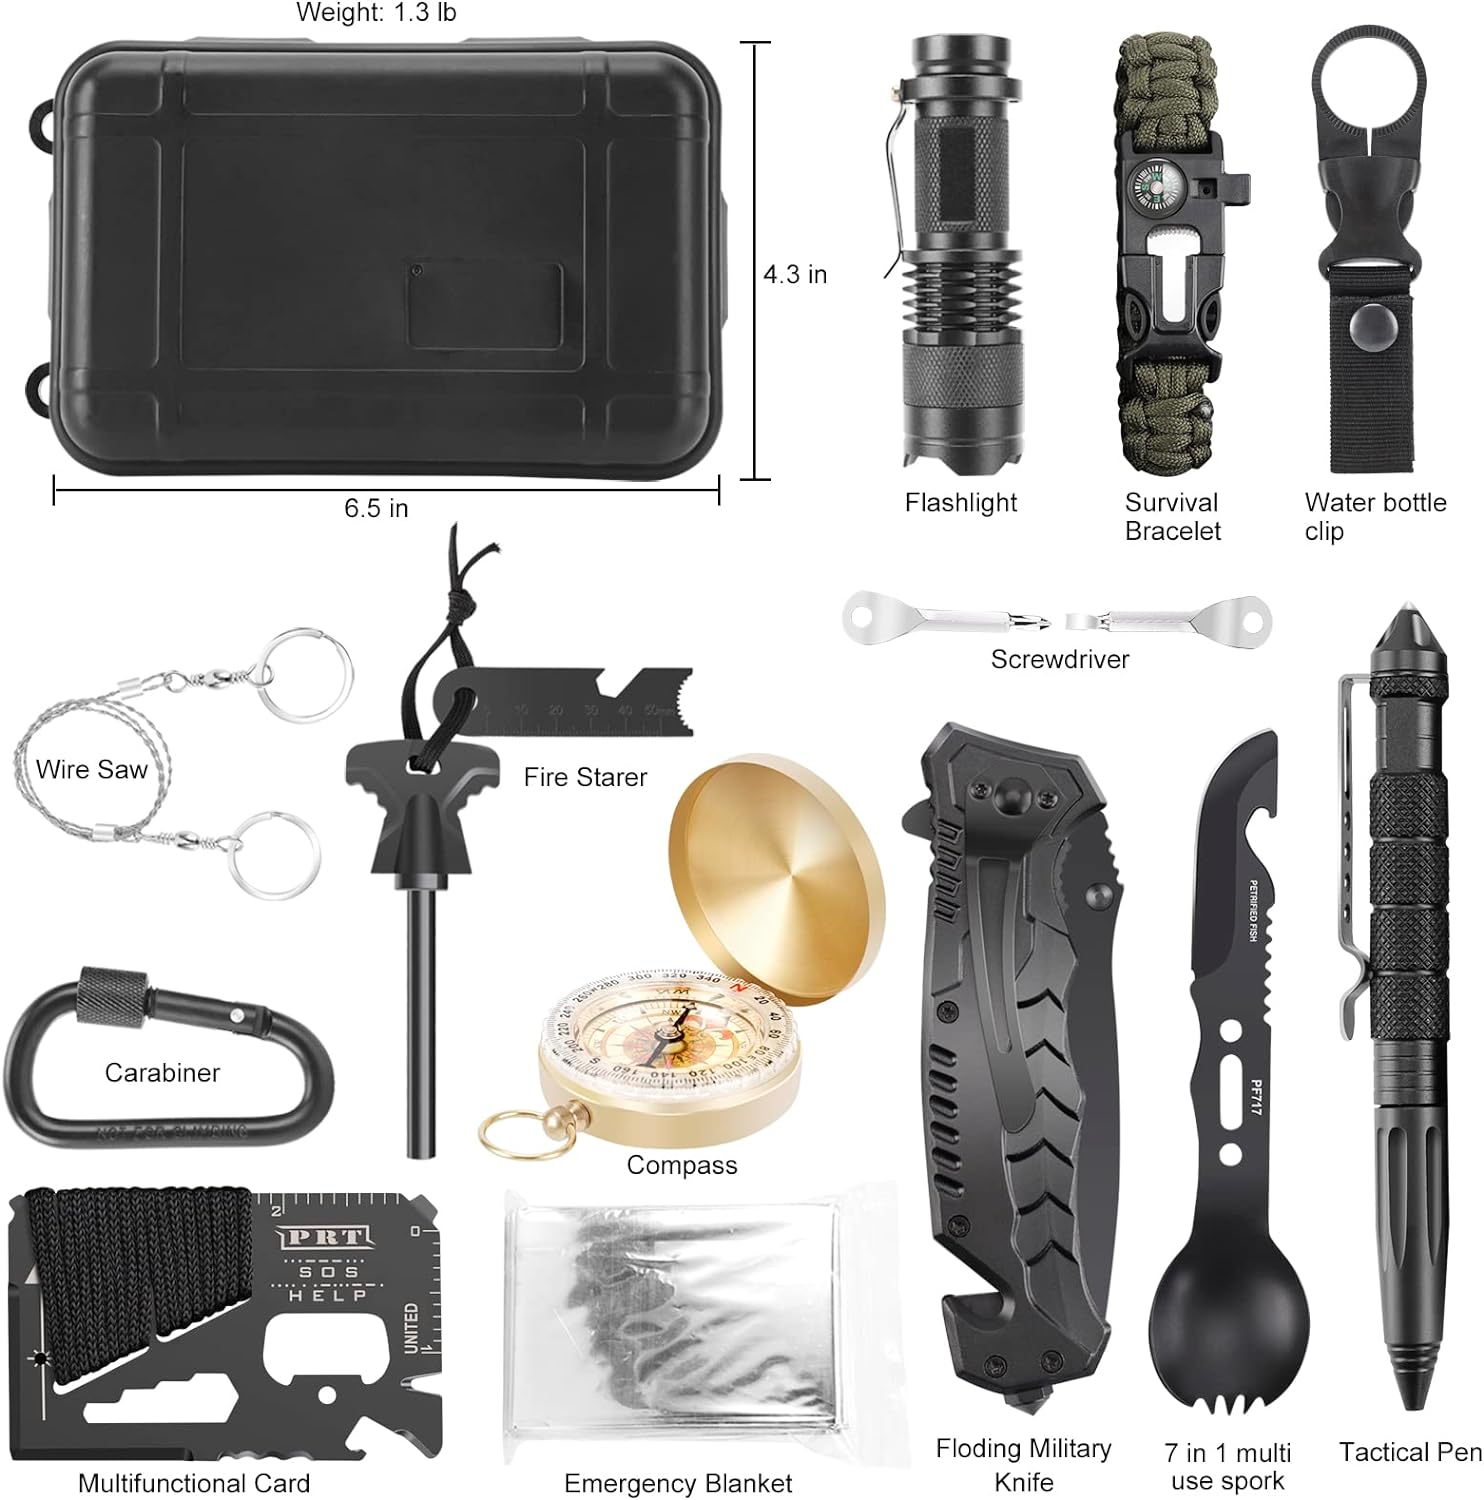 The Compact Survival Kit 17-in-1 Review